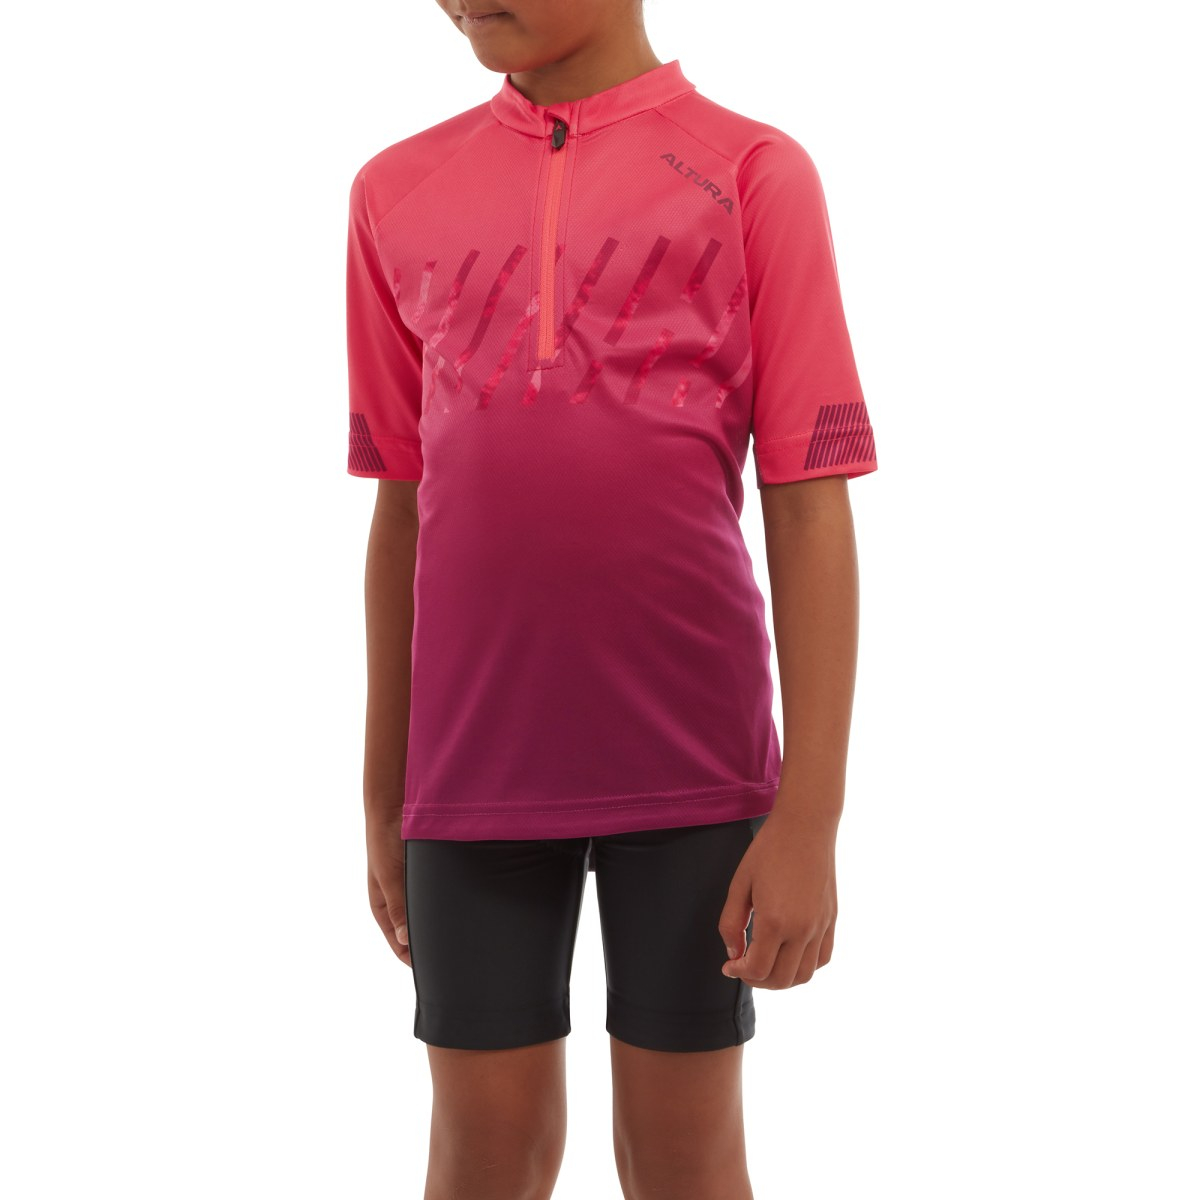 Altura  Kids Airstream Short Sleeve Cycling Jersey 5 to 6 Years PINK